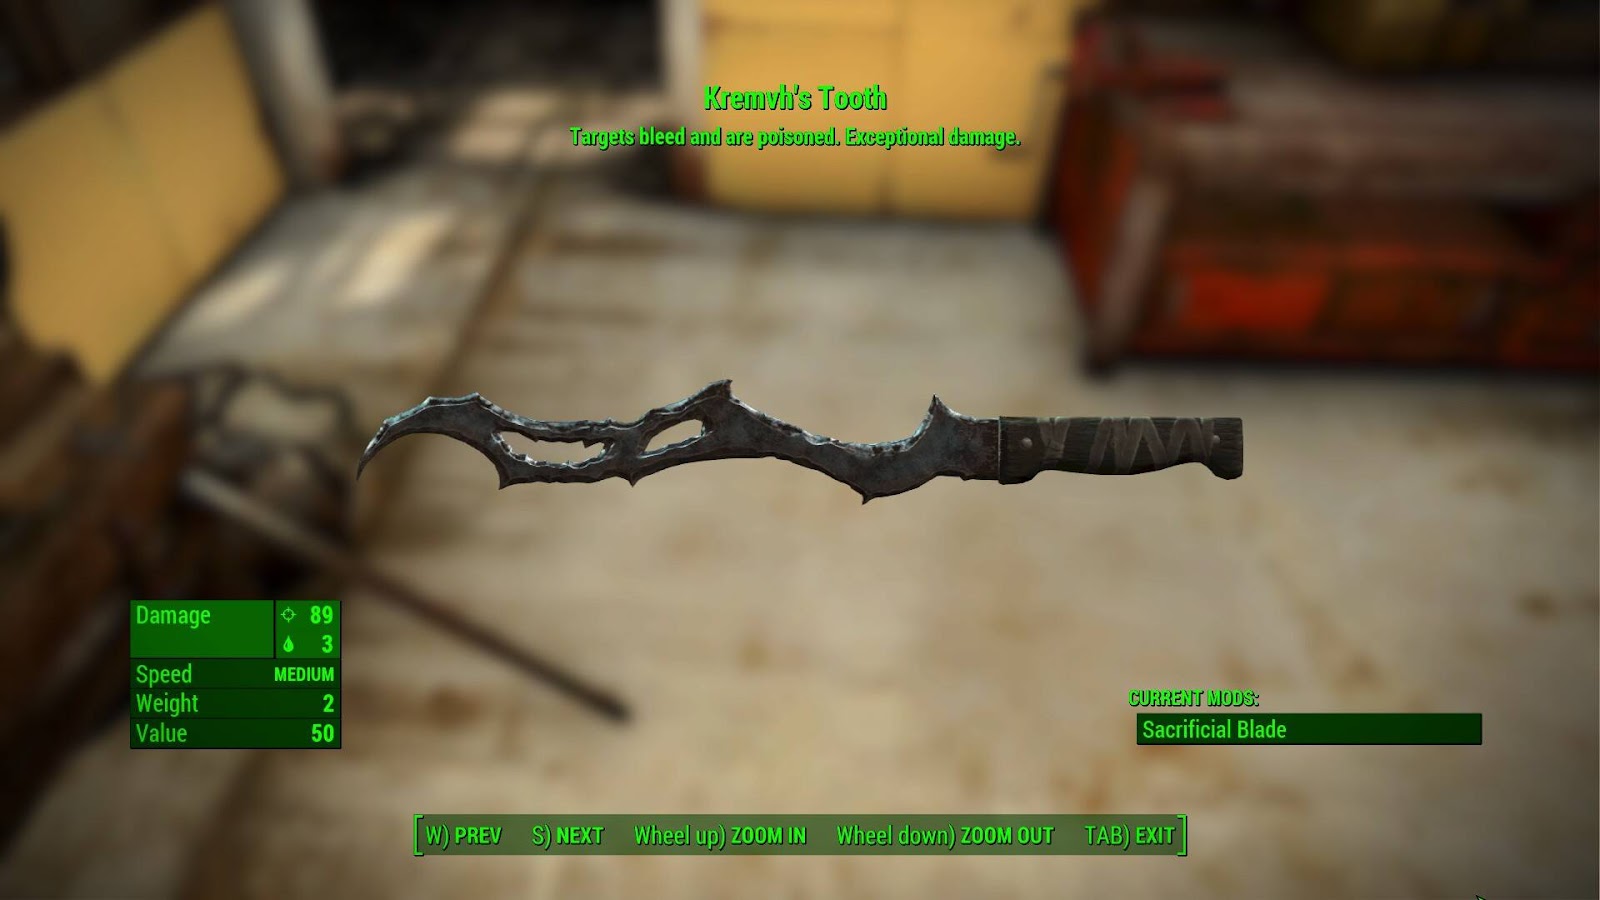 Kremvh's Tooth, a machete with a jagged and warped blade, viewed through the inventory UI of Fallout 4.